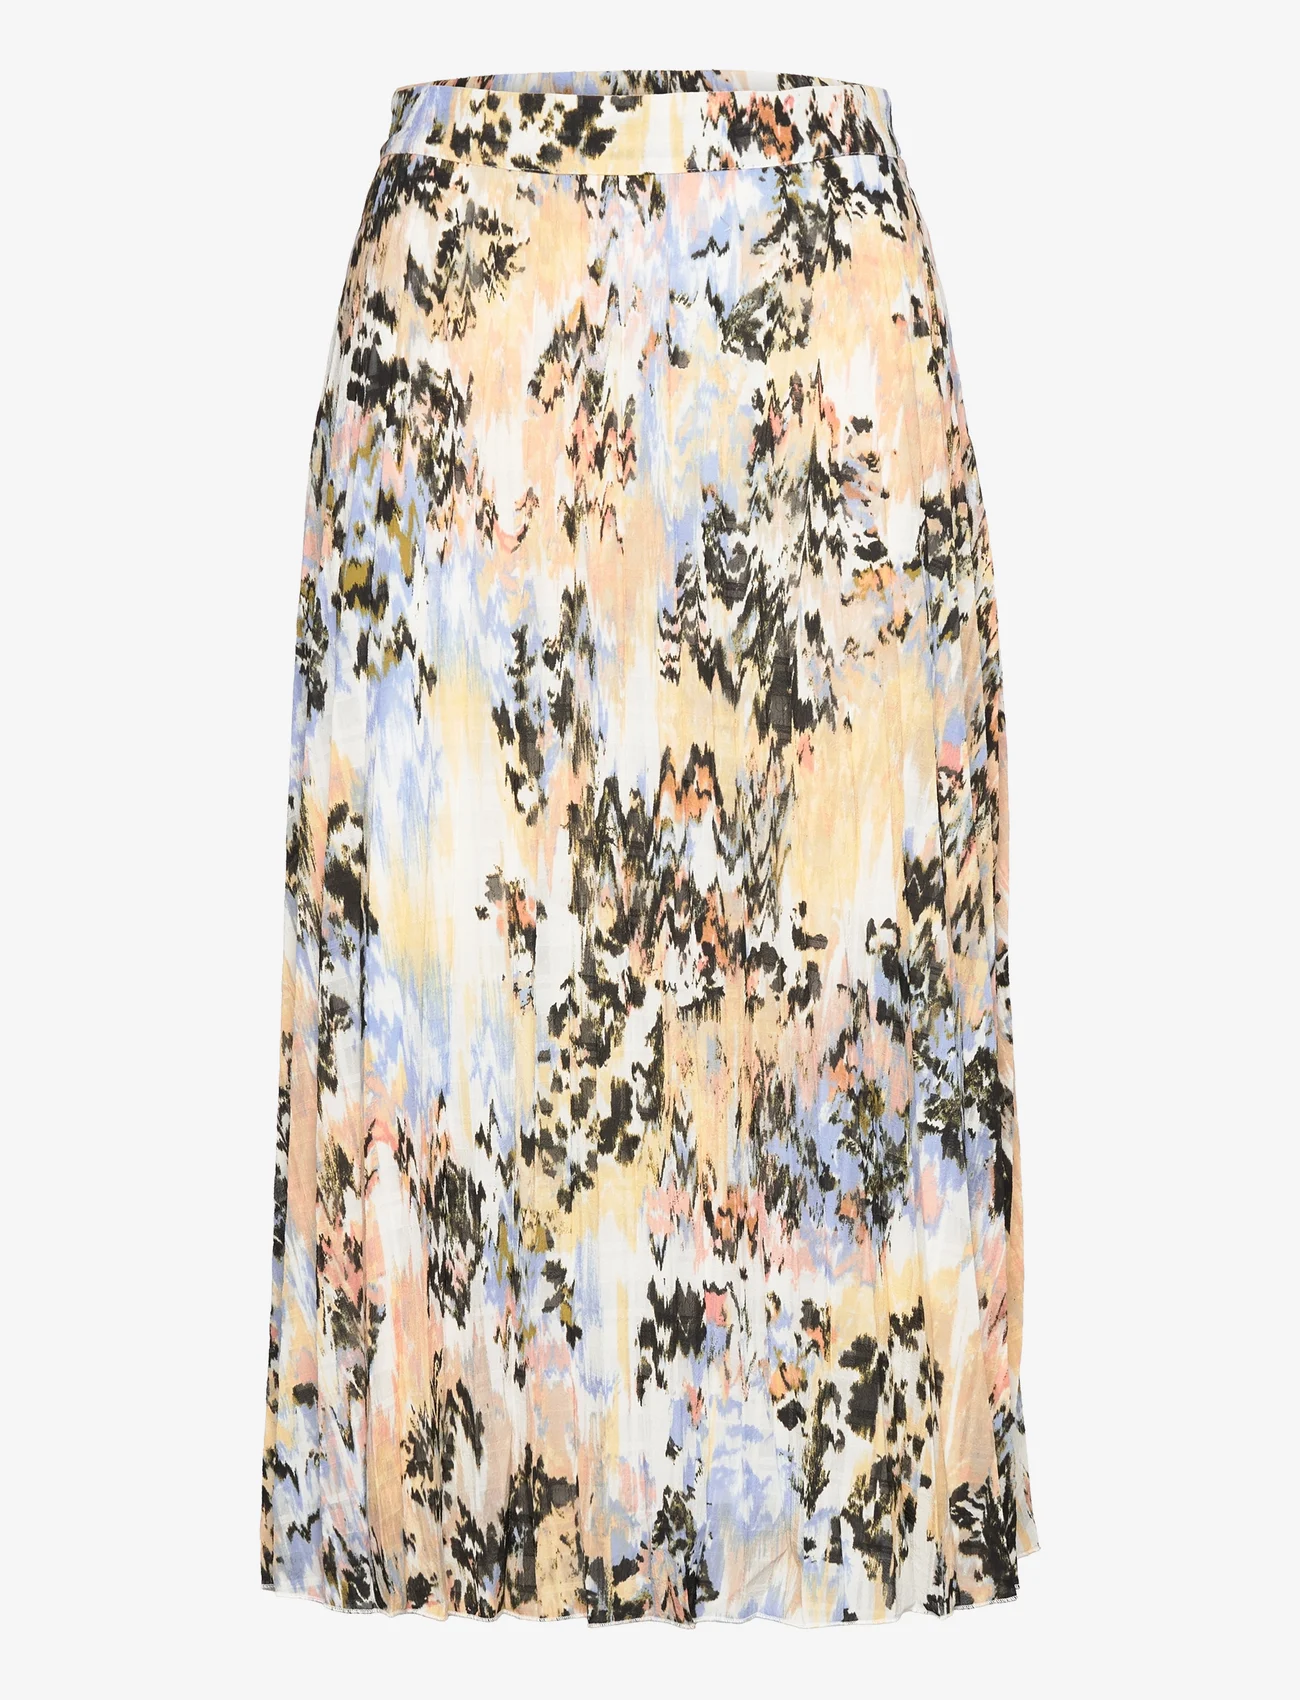 Soaked in Luxury - SLOlympia Skirt - midi skirts - parsnip abstract print - 0